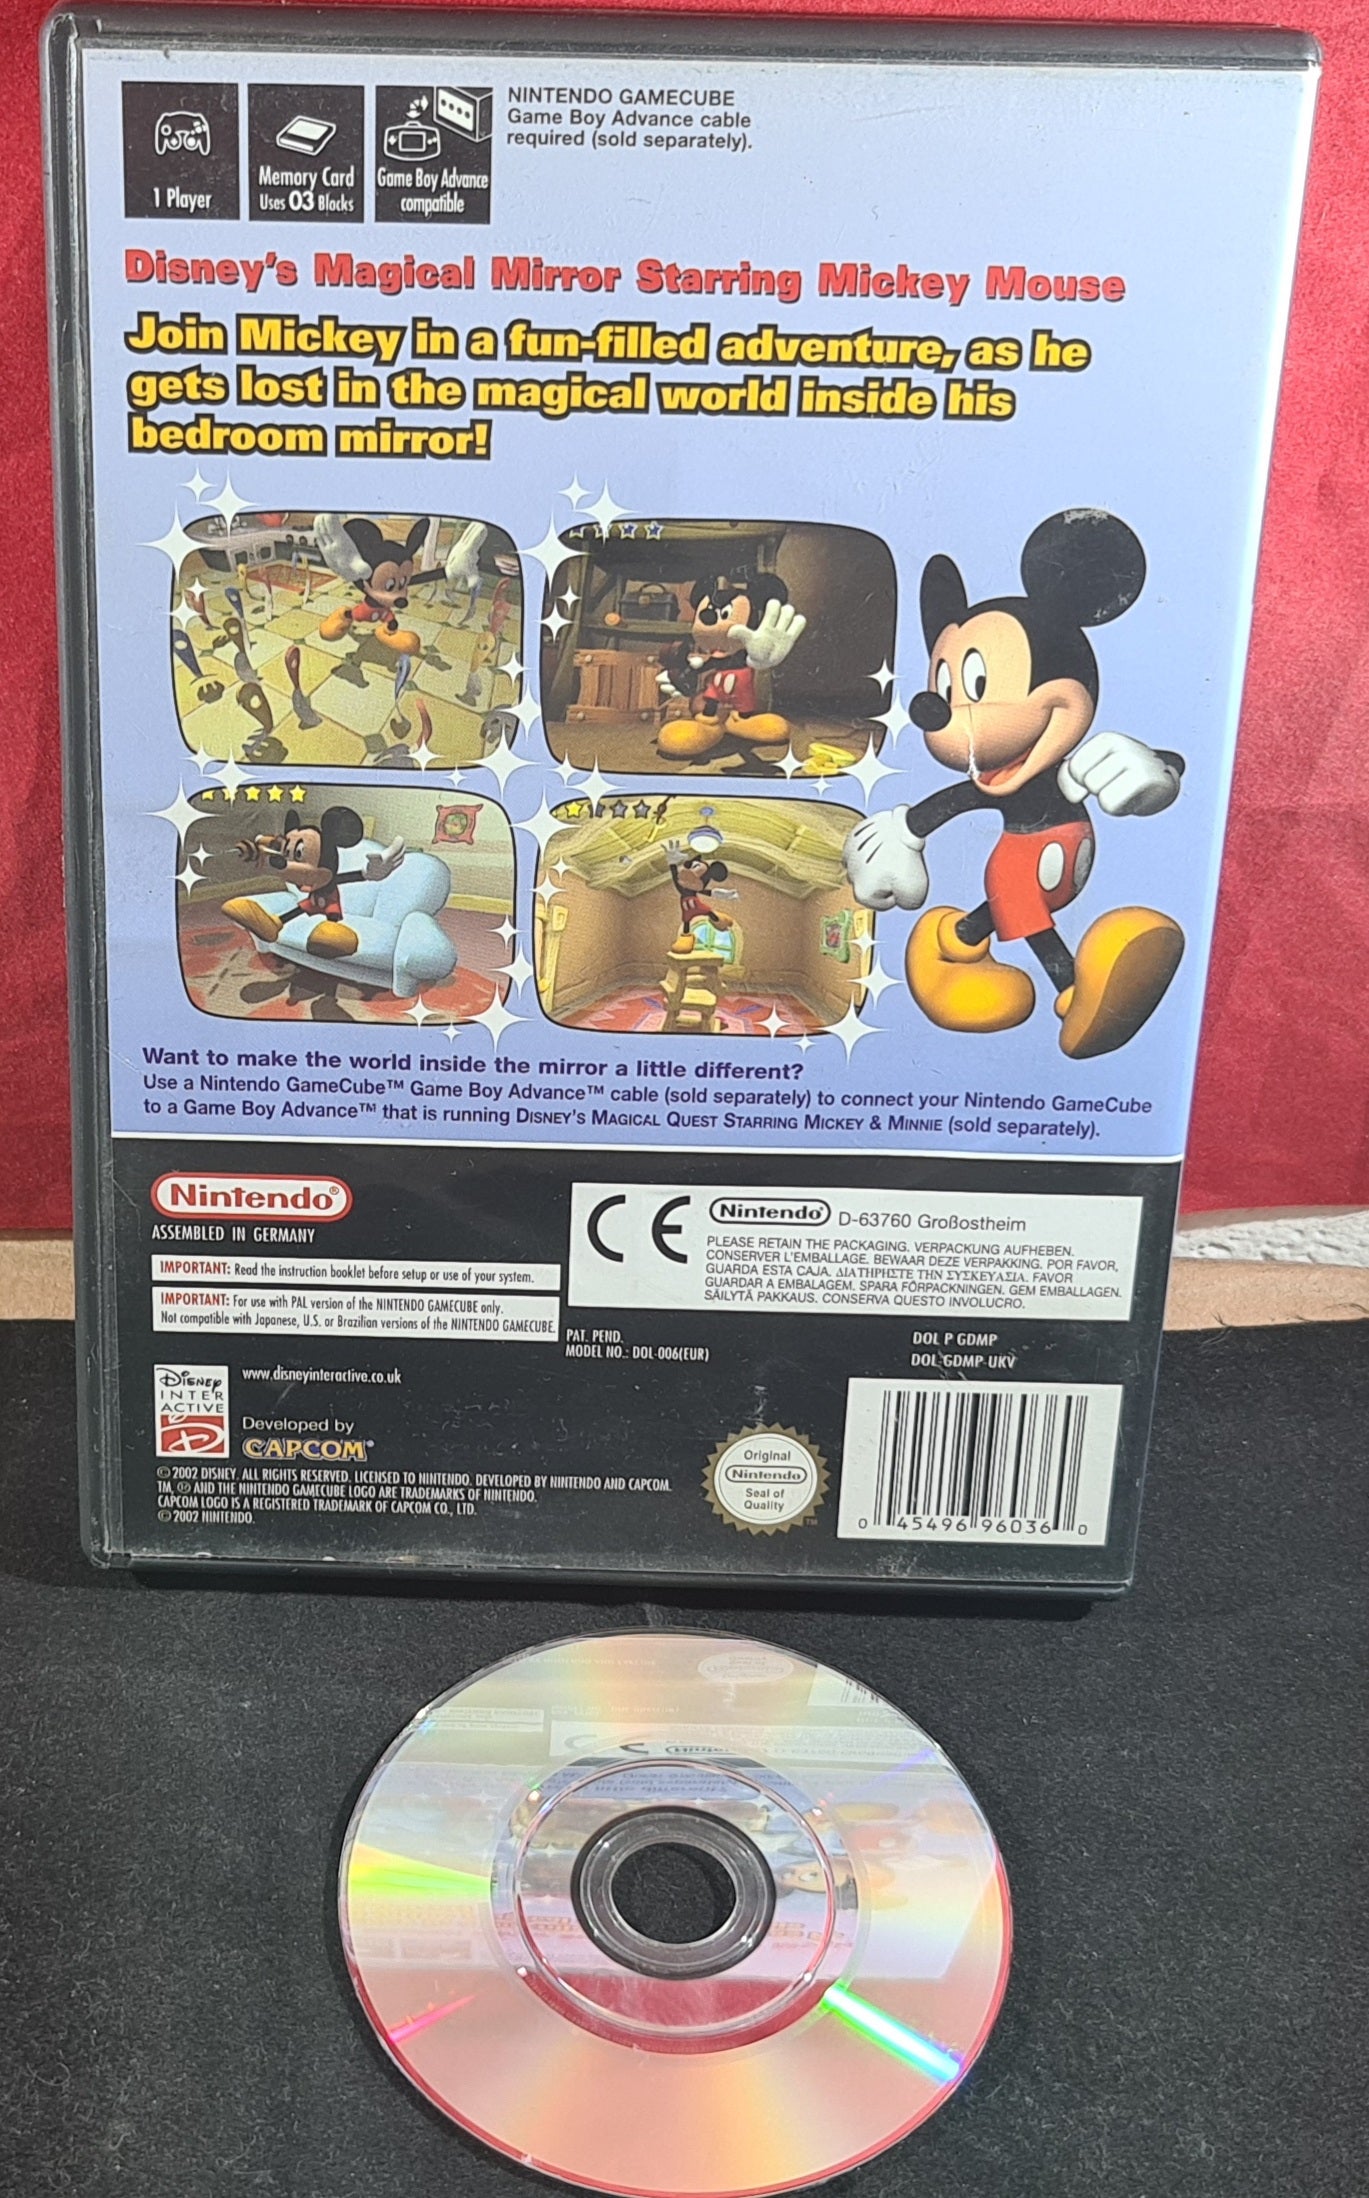 Disney's Magical Mirror Starring Mickey Mouse Nintendo GameCube Game